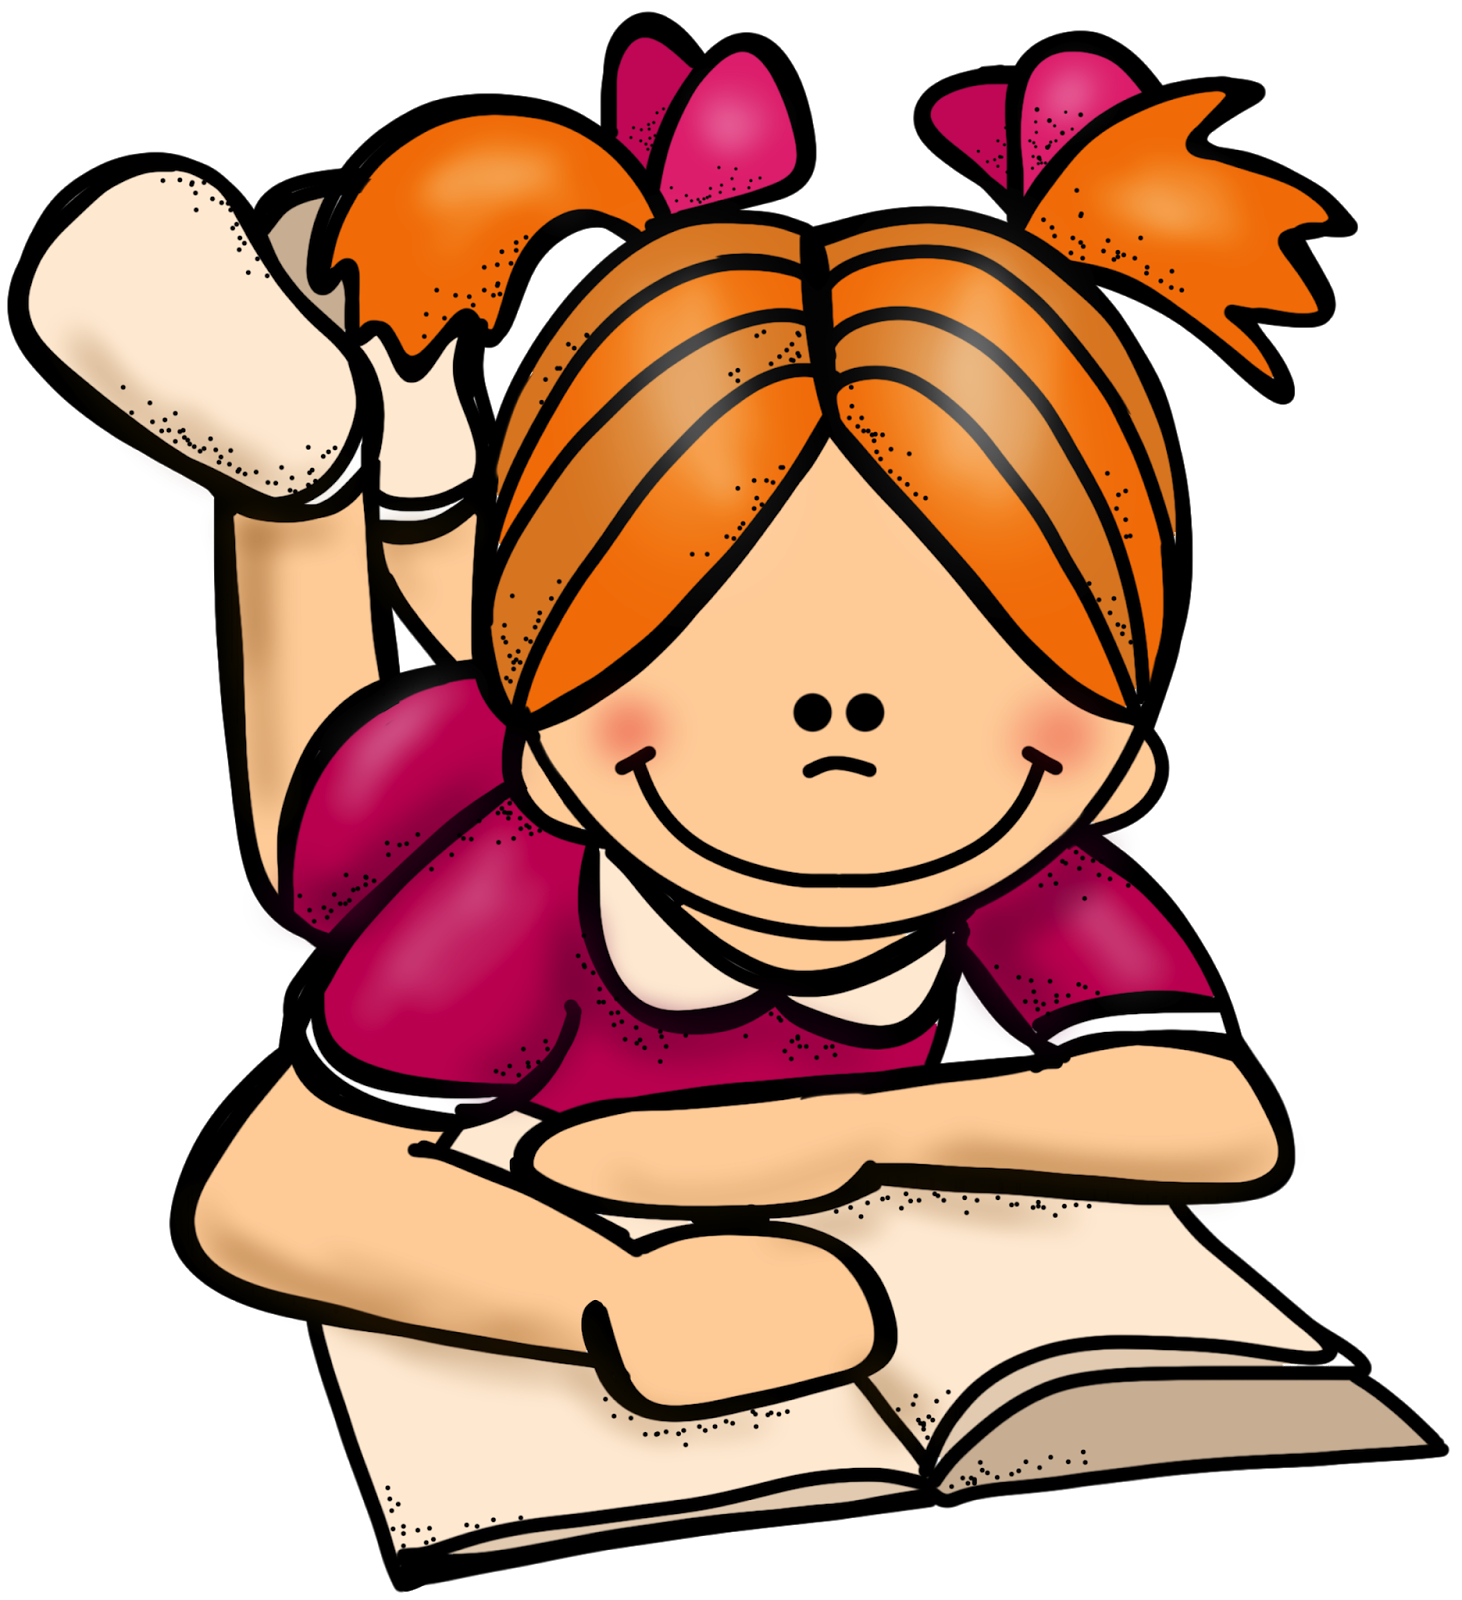 Daily 5 Read To Self Clipart   Clipart Panda   Free Clipart Images